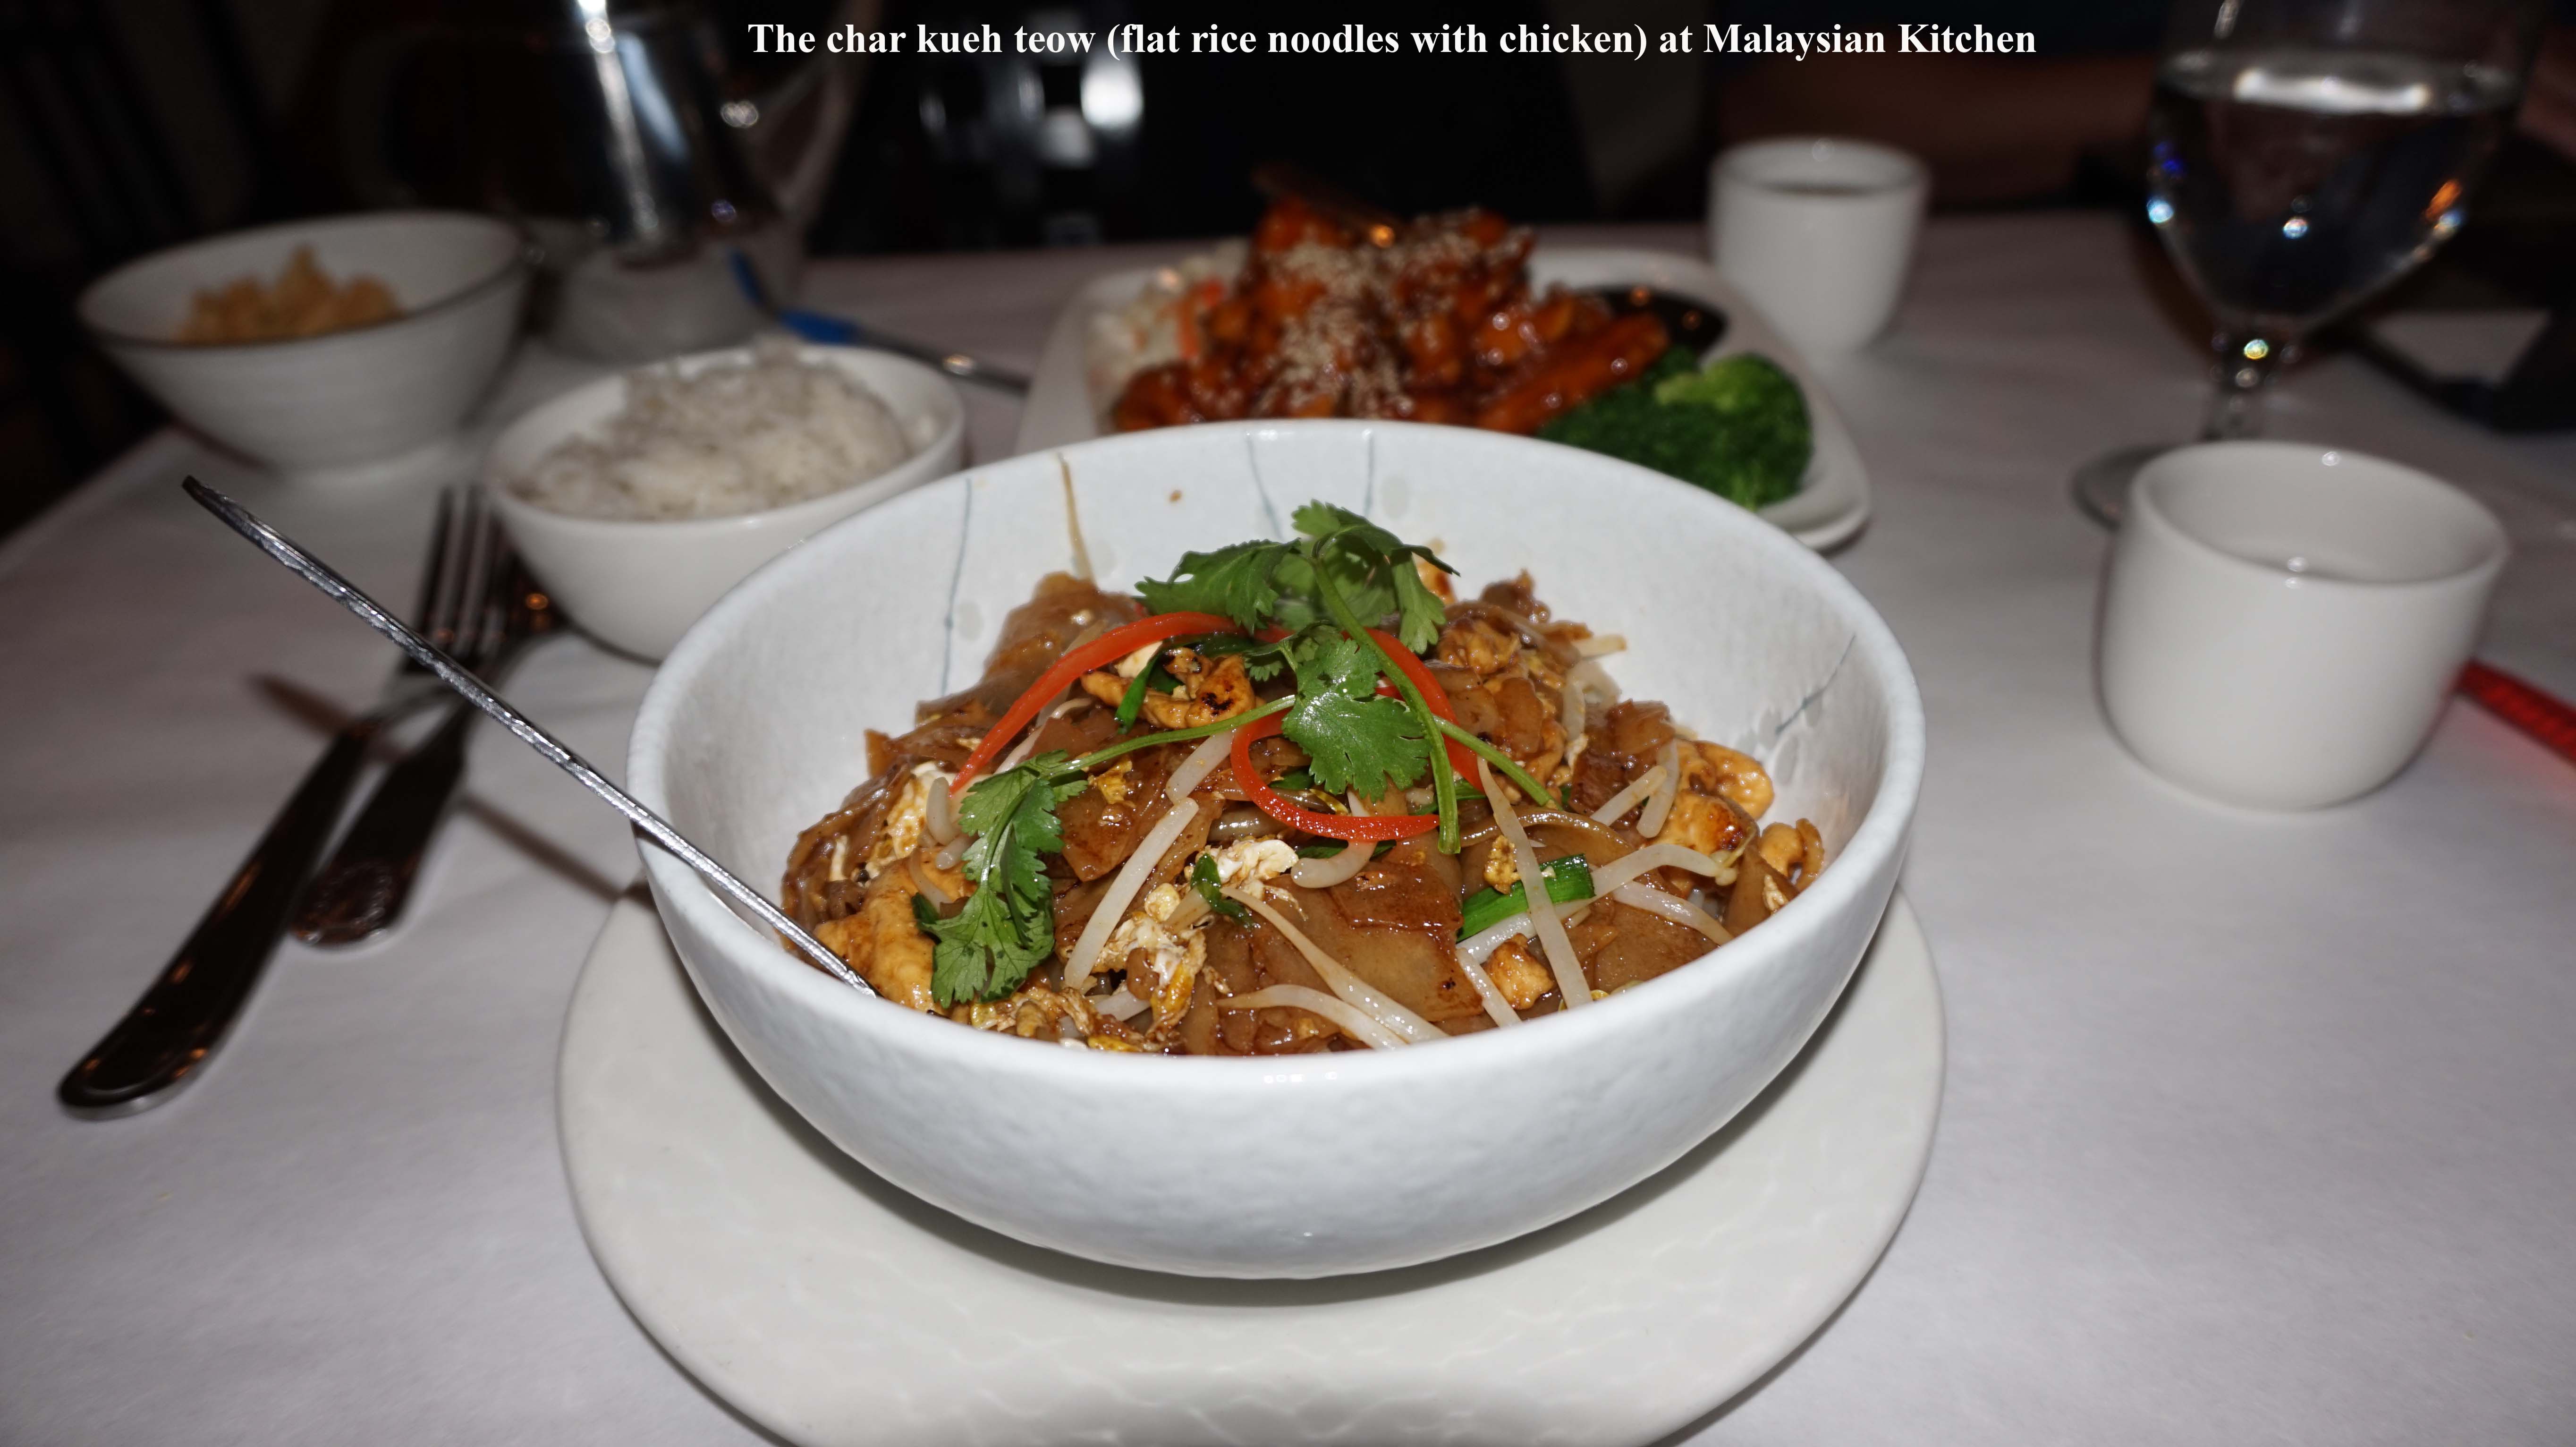 Review: Malaysian Kitchen | The Greer Journal